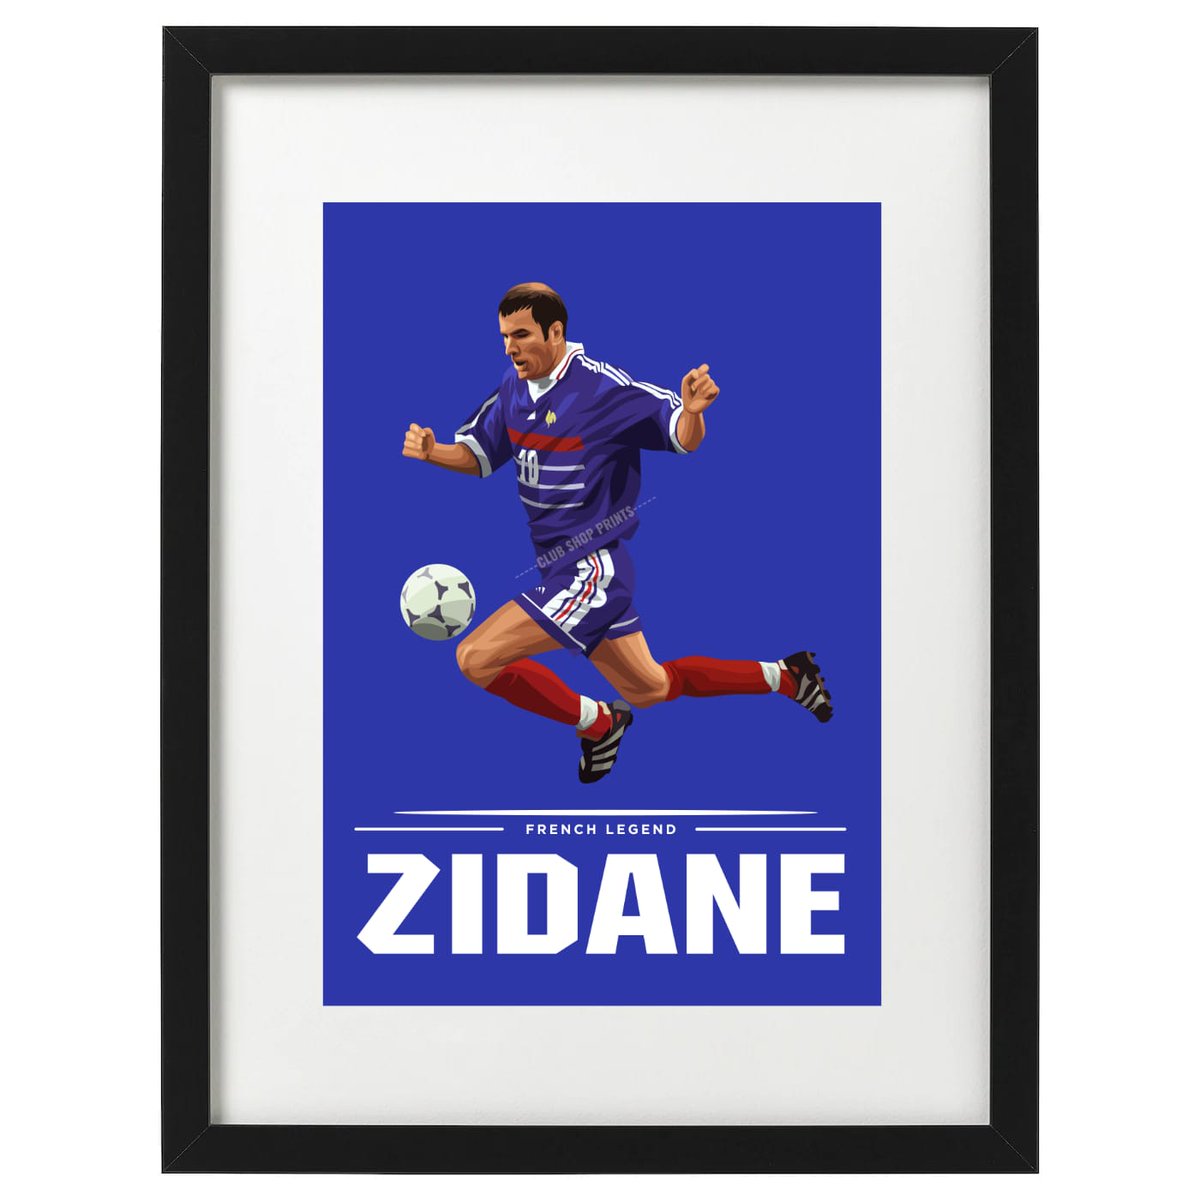 🇫🇷 France 98 legends 🇧🇷 #r9 and 🇫🇷 #Zidane art prints available now. Free UK delivery. Link in bio 👆🏻 #footballart #r9 #Zidane #france98 #retrofootball #ronaldo